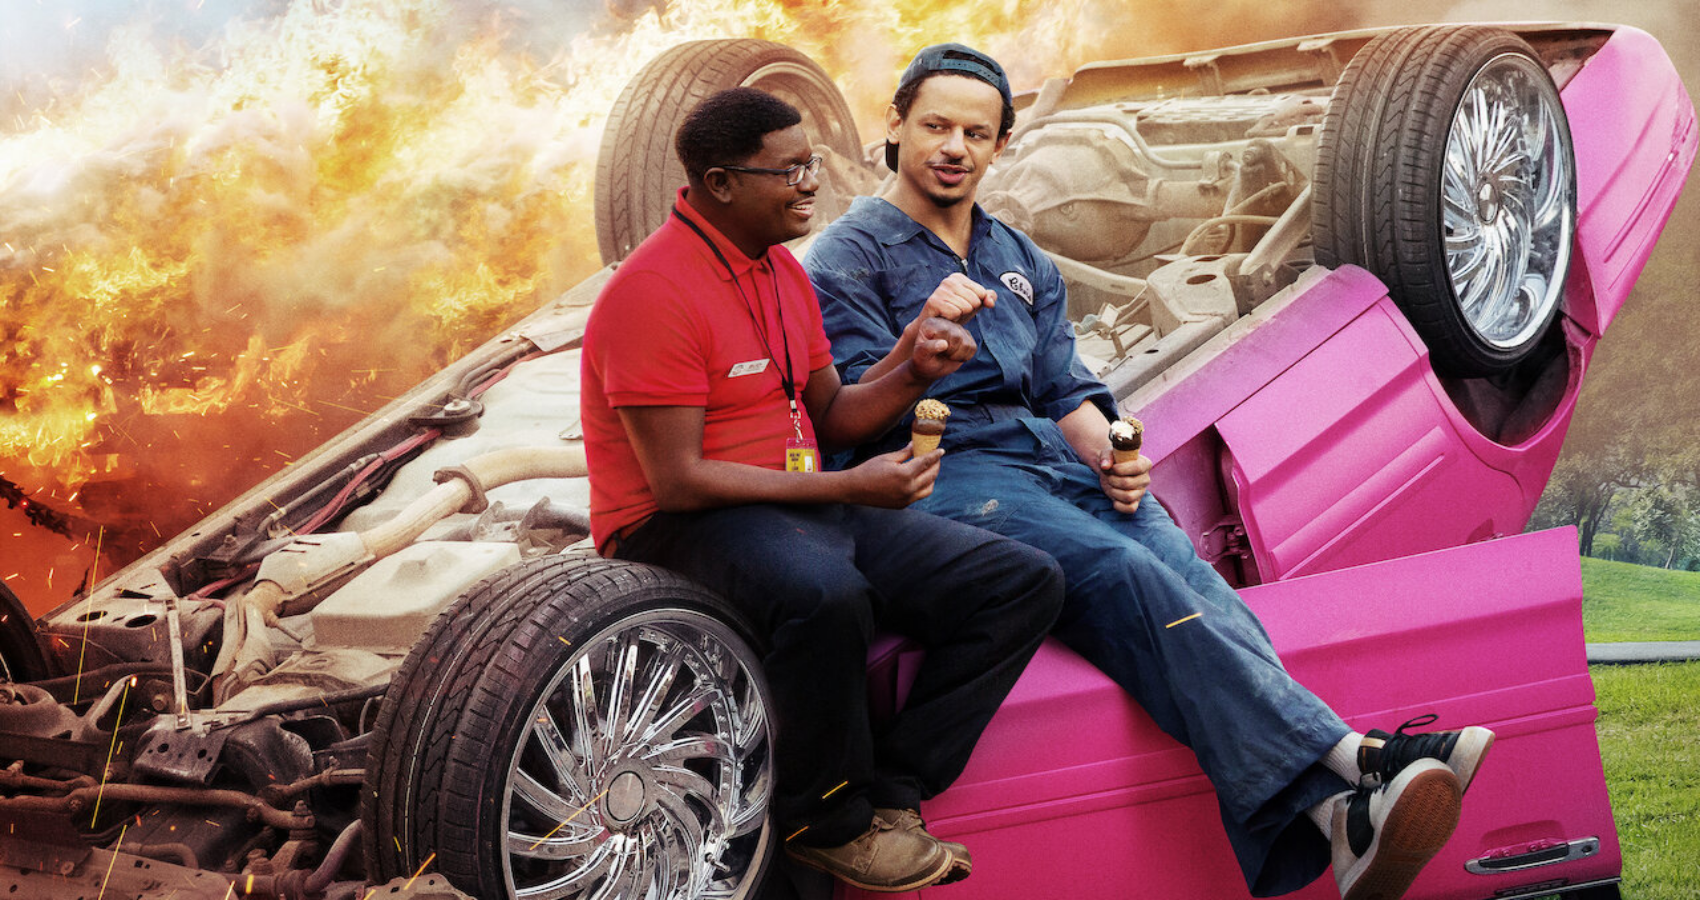 Eric Andre and friend sit on burning upside down car in Bad Trip